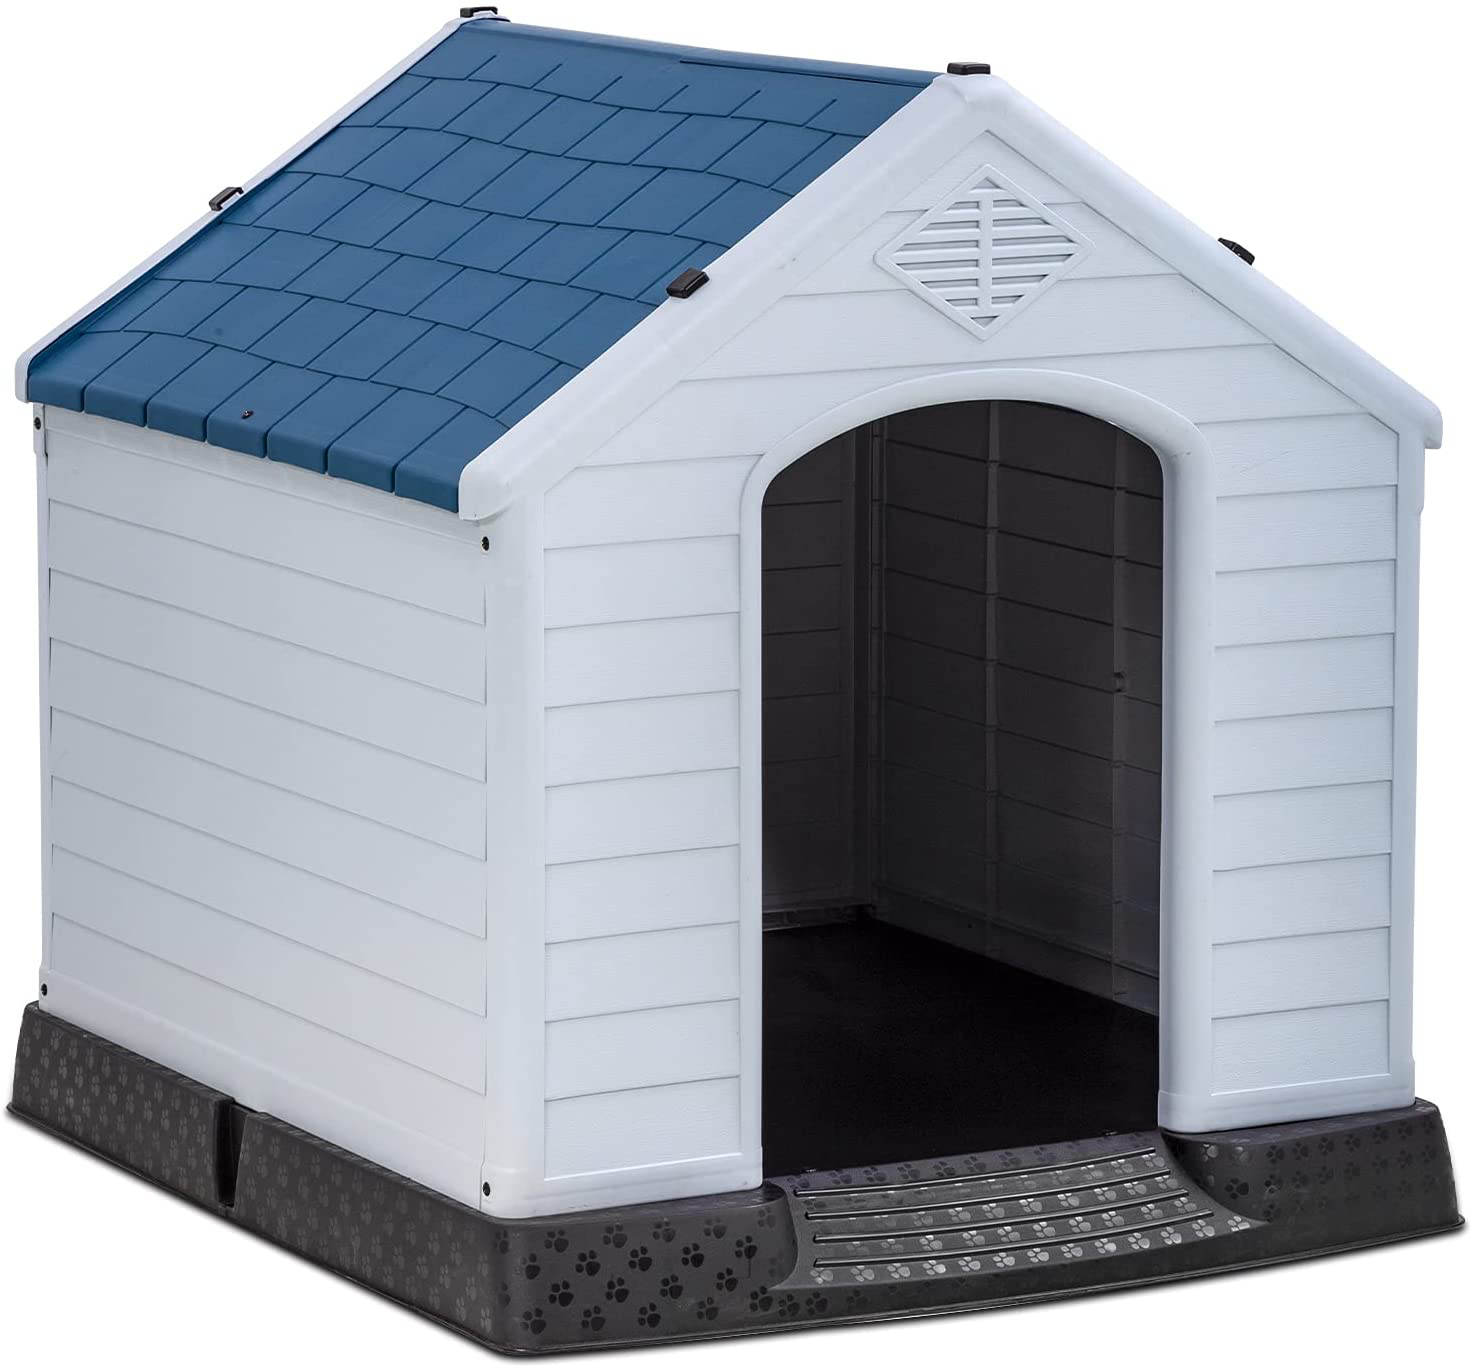 Bestpet Large Dog House Insulated Kennel Durable Plastic Dog House for Small Medium Large Dogs Indoor Outdoor Weather & Water Resistant Pet Crate with Air Vents and Elevated Floor Animals & Pet Supplies > Pet Supplies > Dog Supplies > Dog Houses BestPet 25Lx27iWx28H  